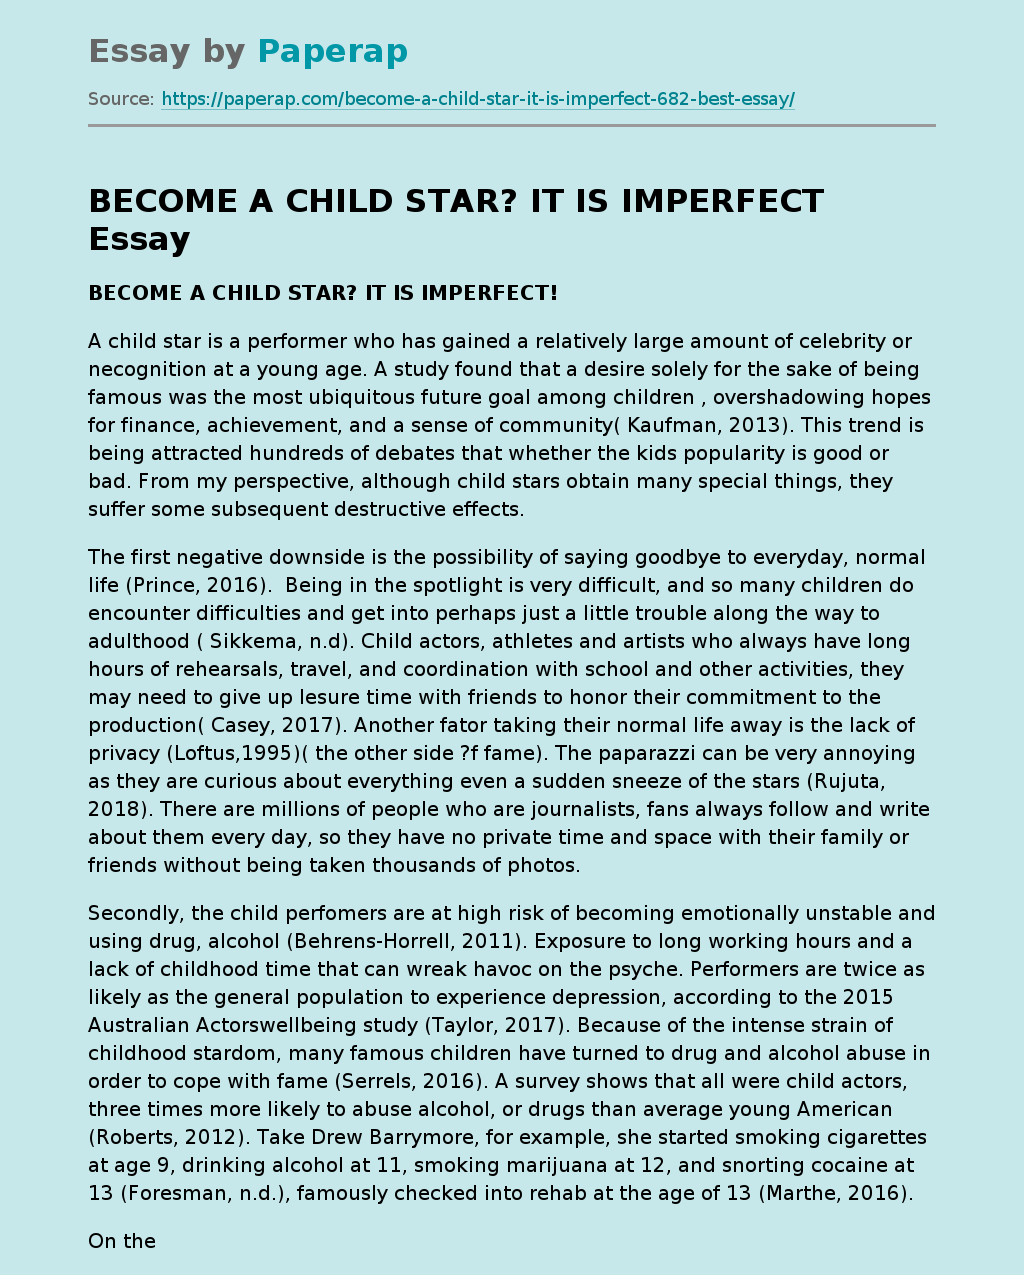 BECOME A CHILD STAR? IT IS IMPERFECT